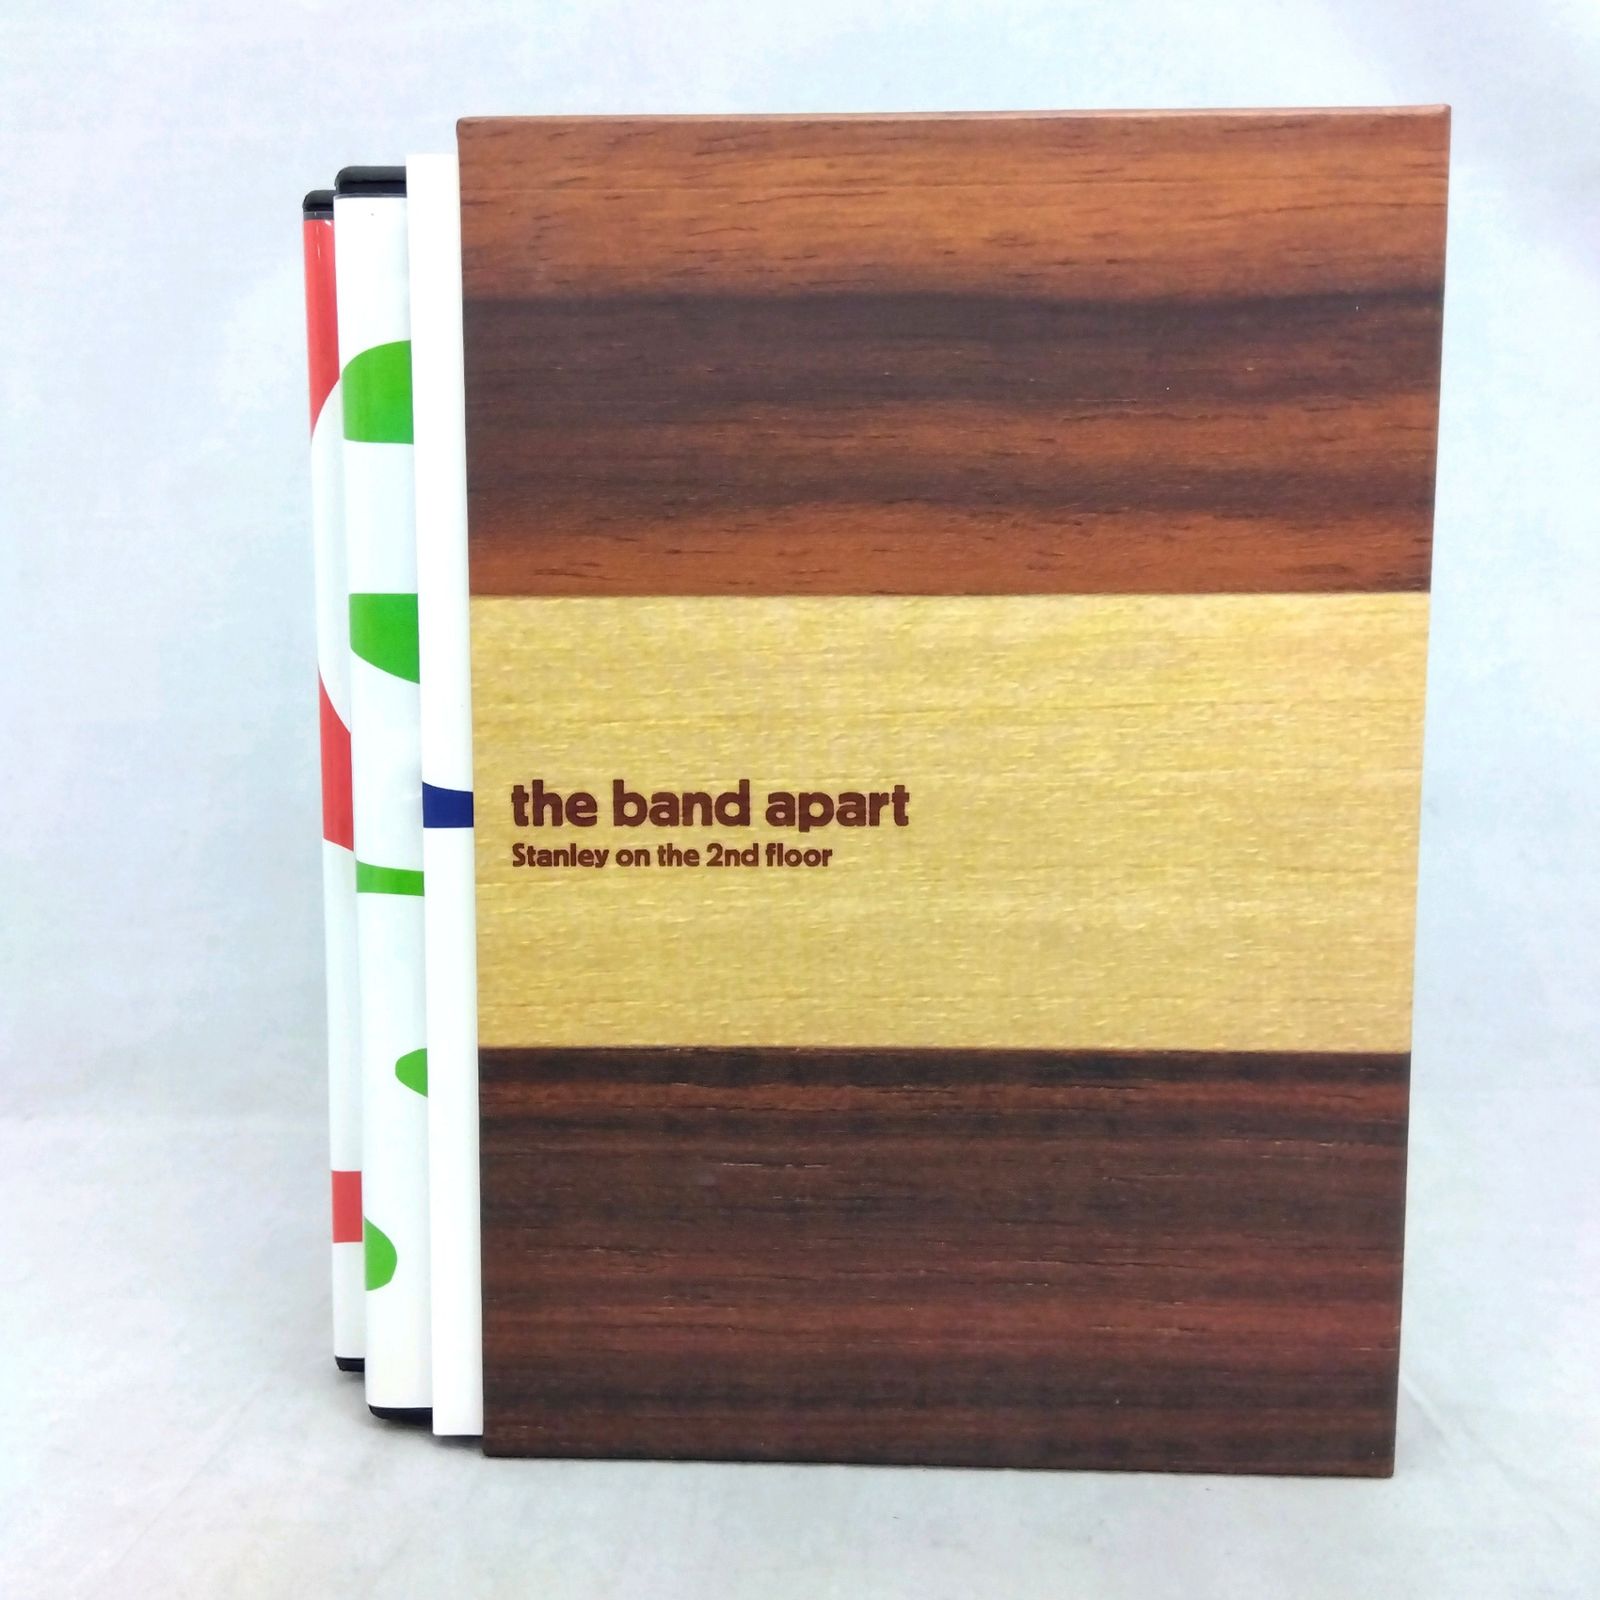 Stanley on the 2nd floor【完全生産限定盤】 [DVD]／the band apart